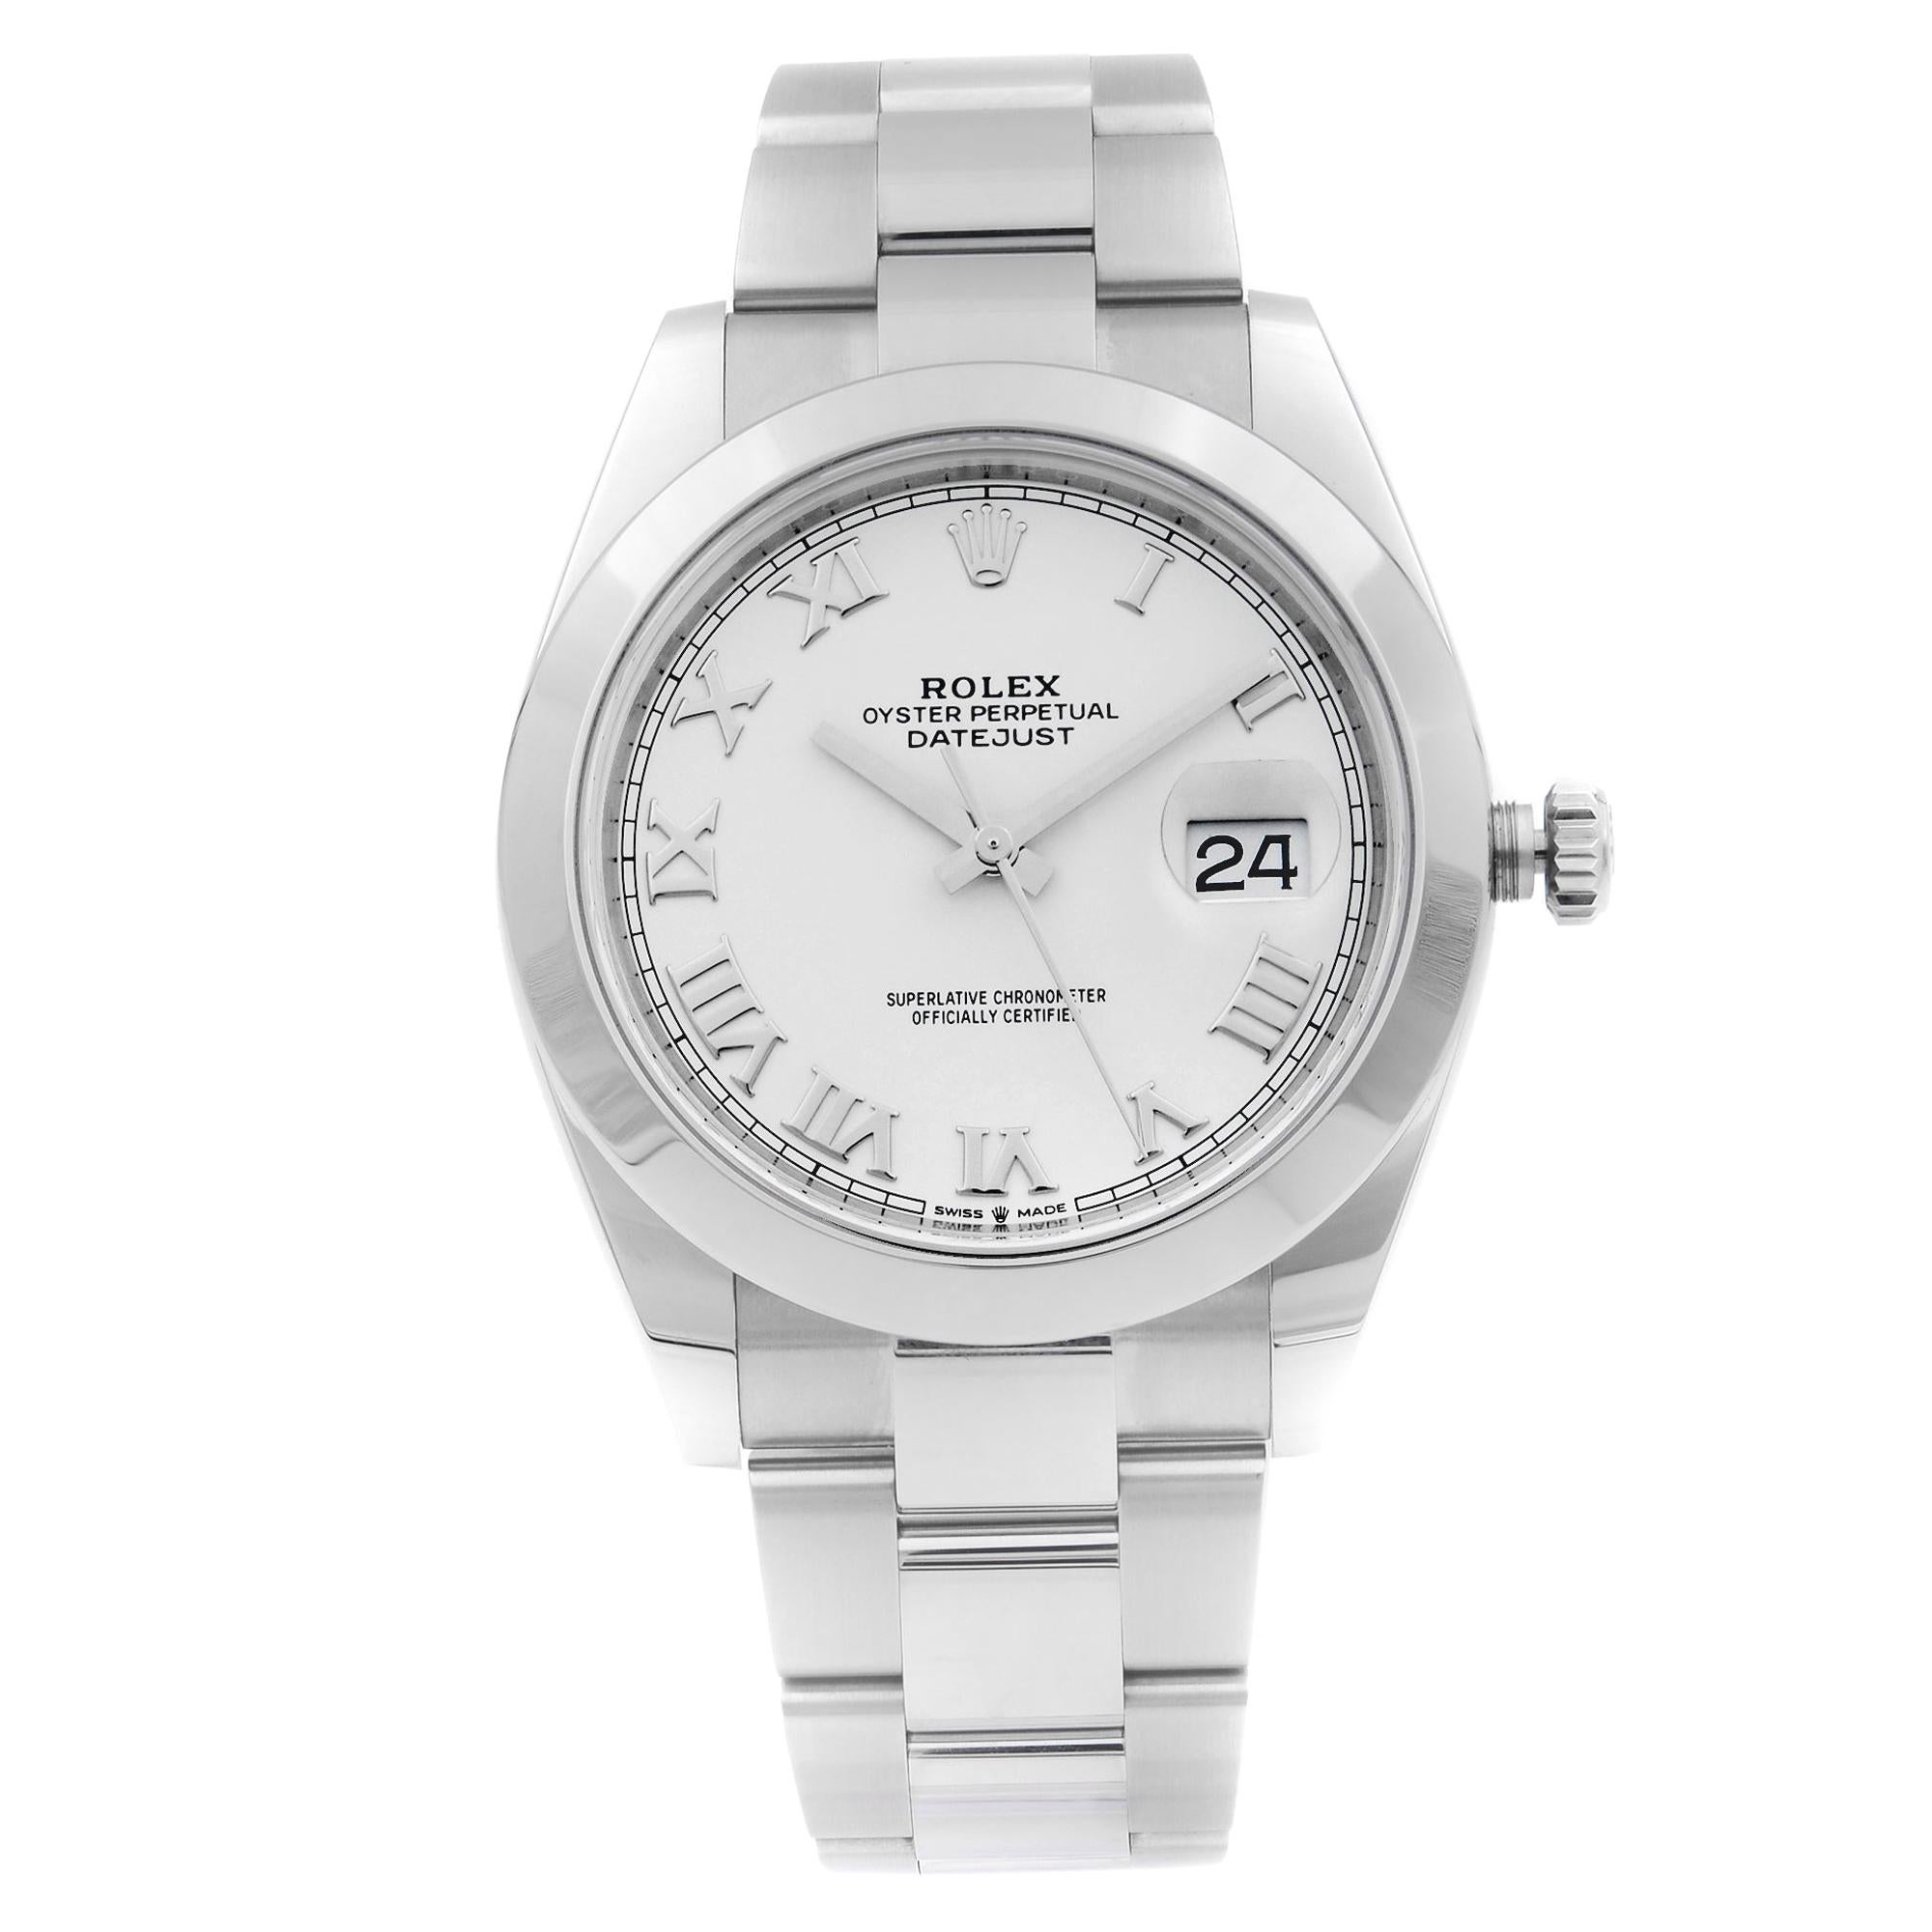 Rolex Datejust Steel White Roman Dial Smooth Automatic Men's Watch 126300